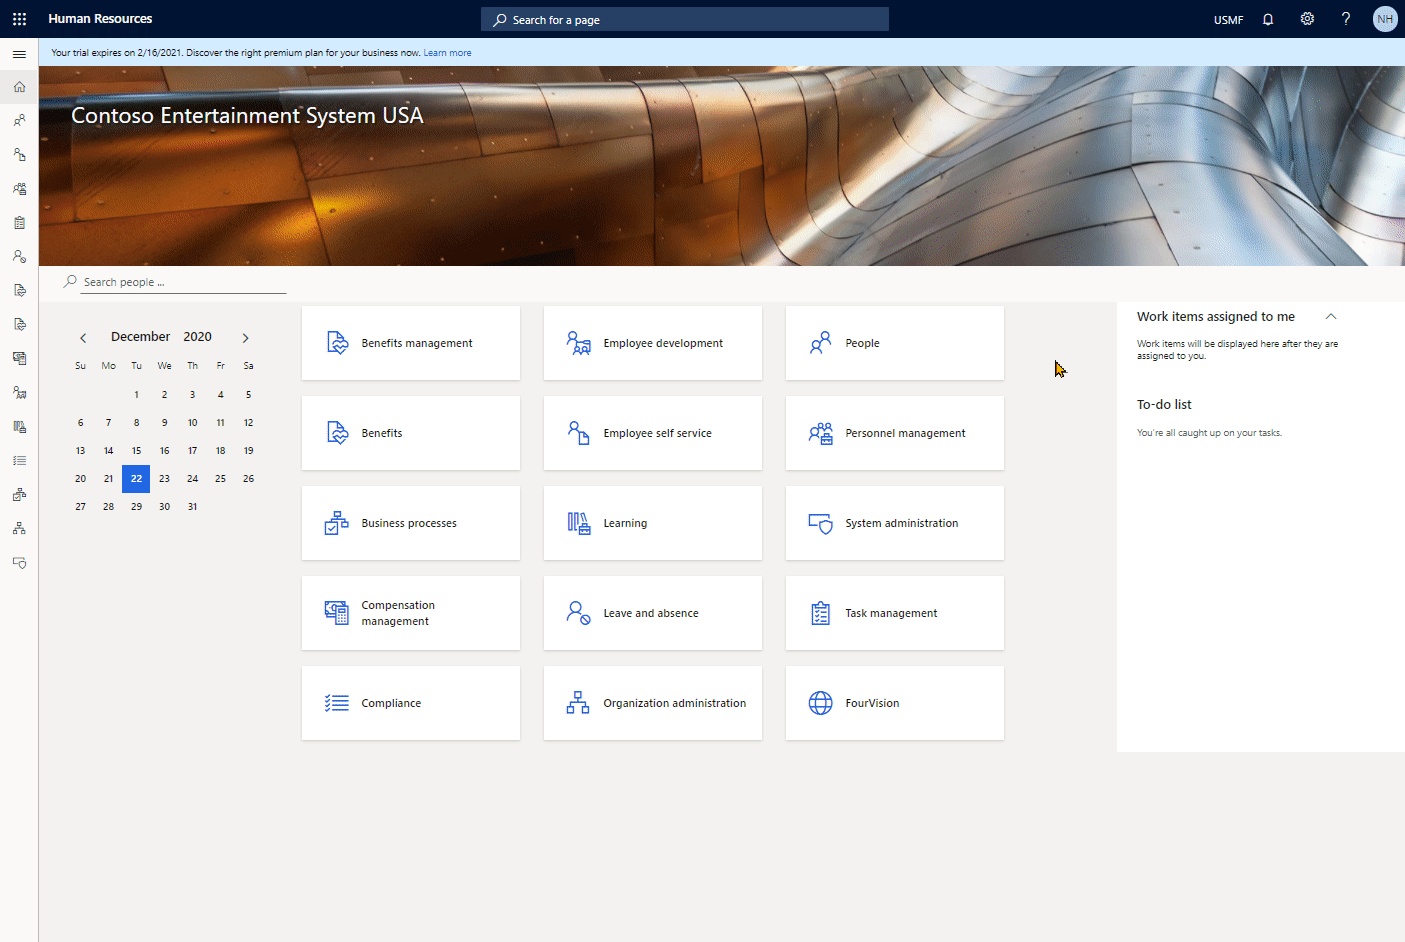 Dynamics 365 Web apps experience